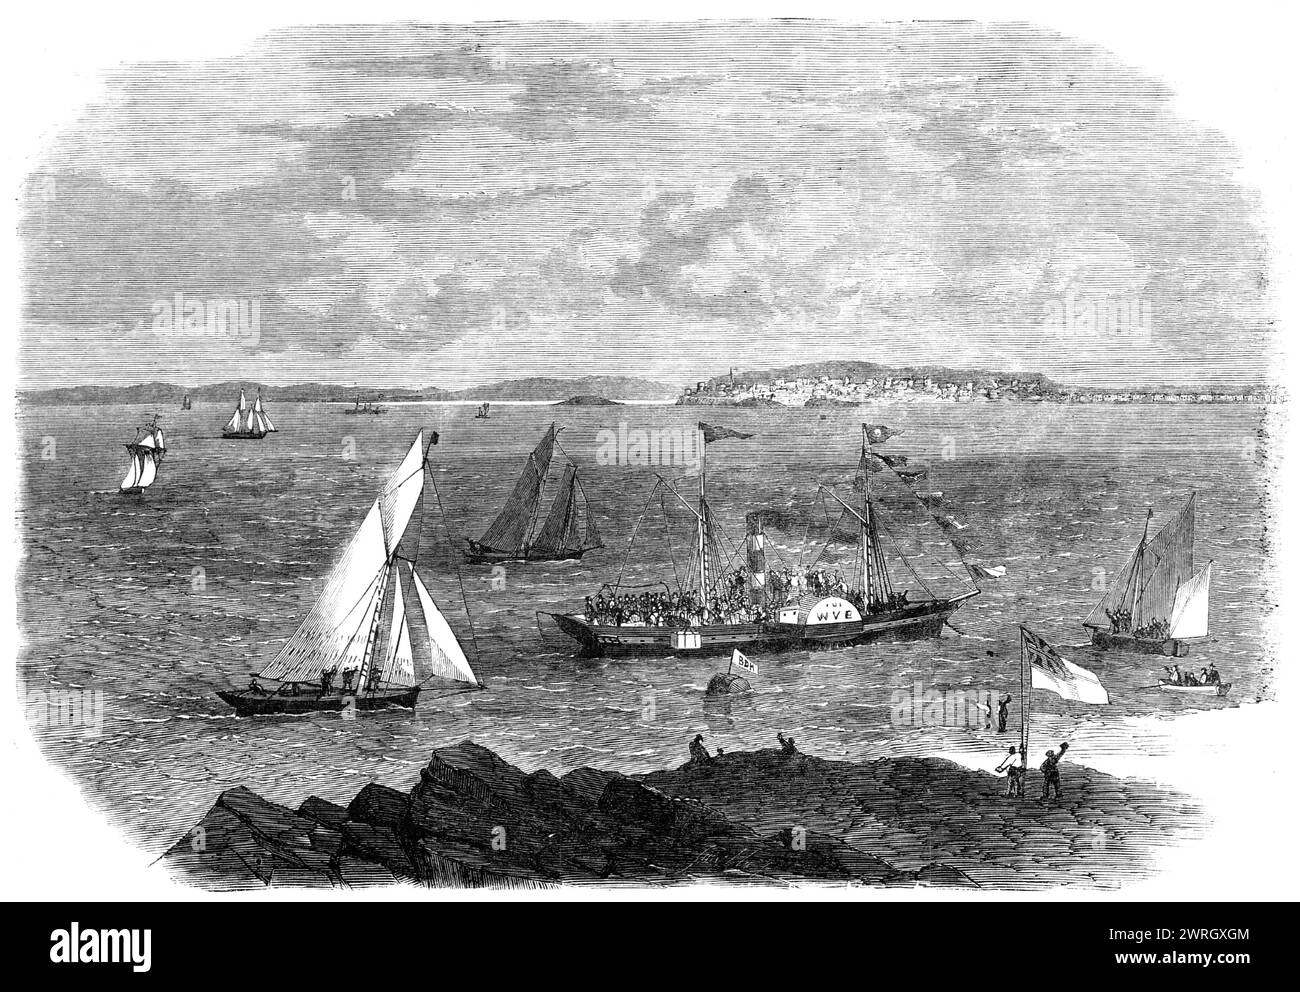 Laying the foundation-stone of Brean Down Breakwater, Weston-Super-Mare, 1864. 'View of...the moment when the stone was lowered from the little steam-boat the Wye, on board which a company of about two hundred ladies and gentlemen were assembled. The immersion of this stone took place at a distance of some hundred yards from the shore, in about 70 ft. of water. It was greeted with loud cheering by a multitude of people on land, as well as by those afloat in the numerous boats which hovered around. Flags were hoisted, a salute of cannon was fired, and a band of music on board the Wye struck up Stock Photo